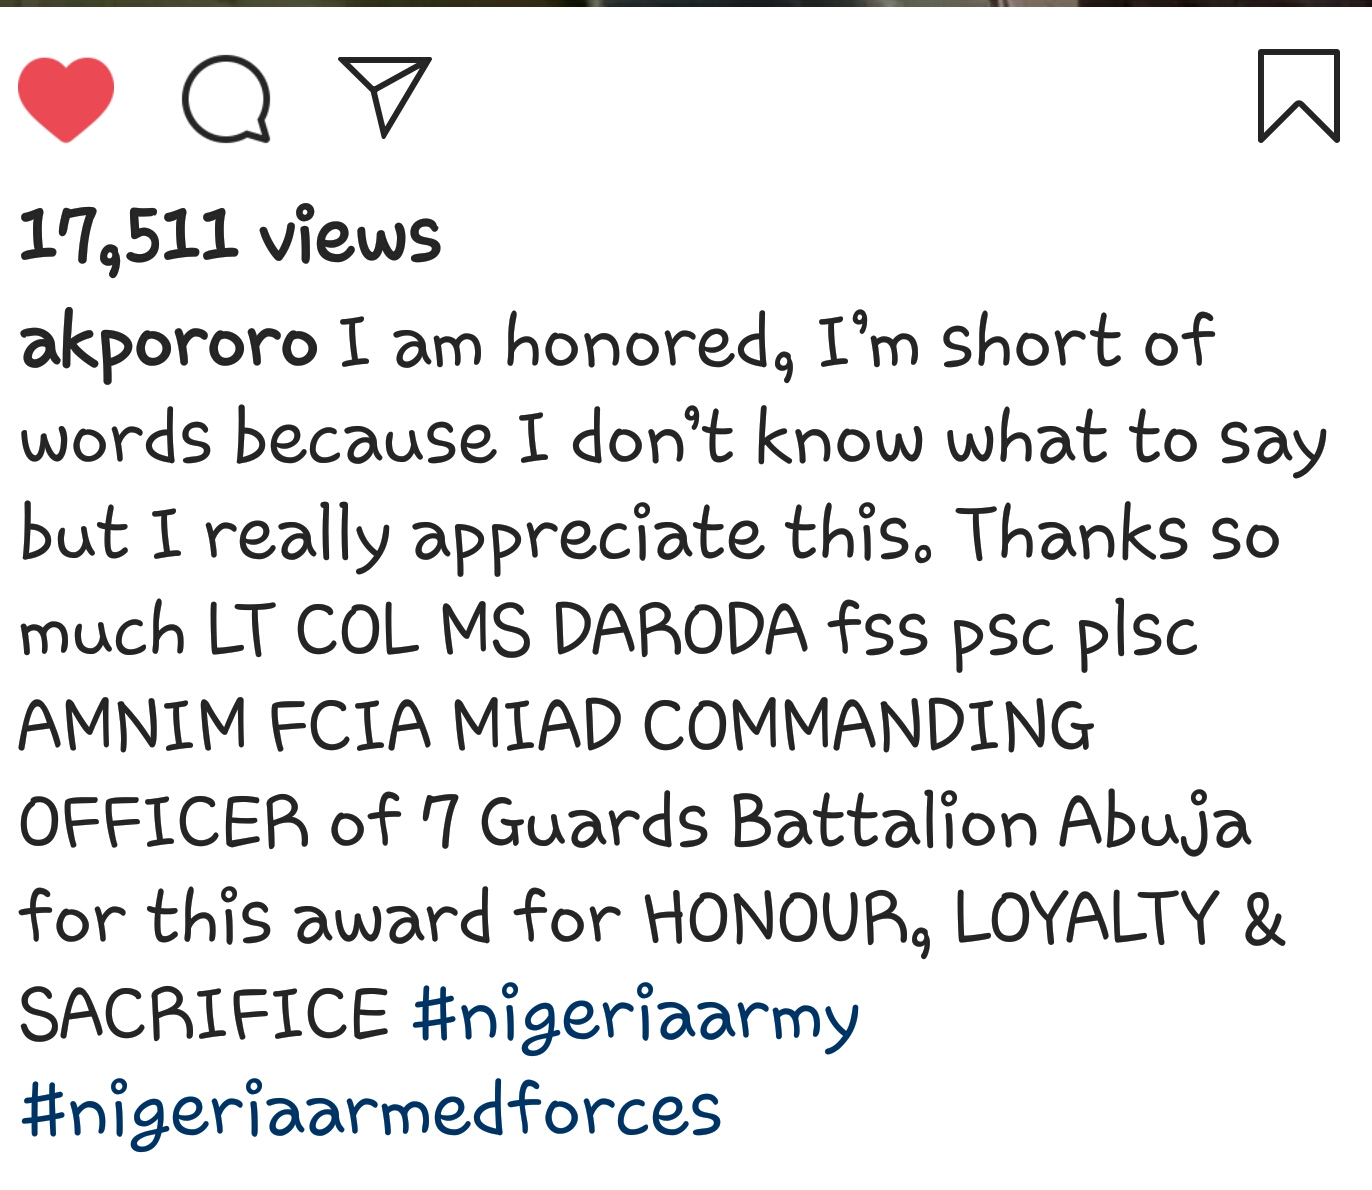 Akpororo unable to hide his joy as he receives honorary award from military command